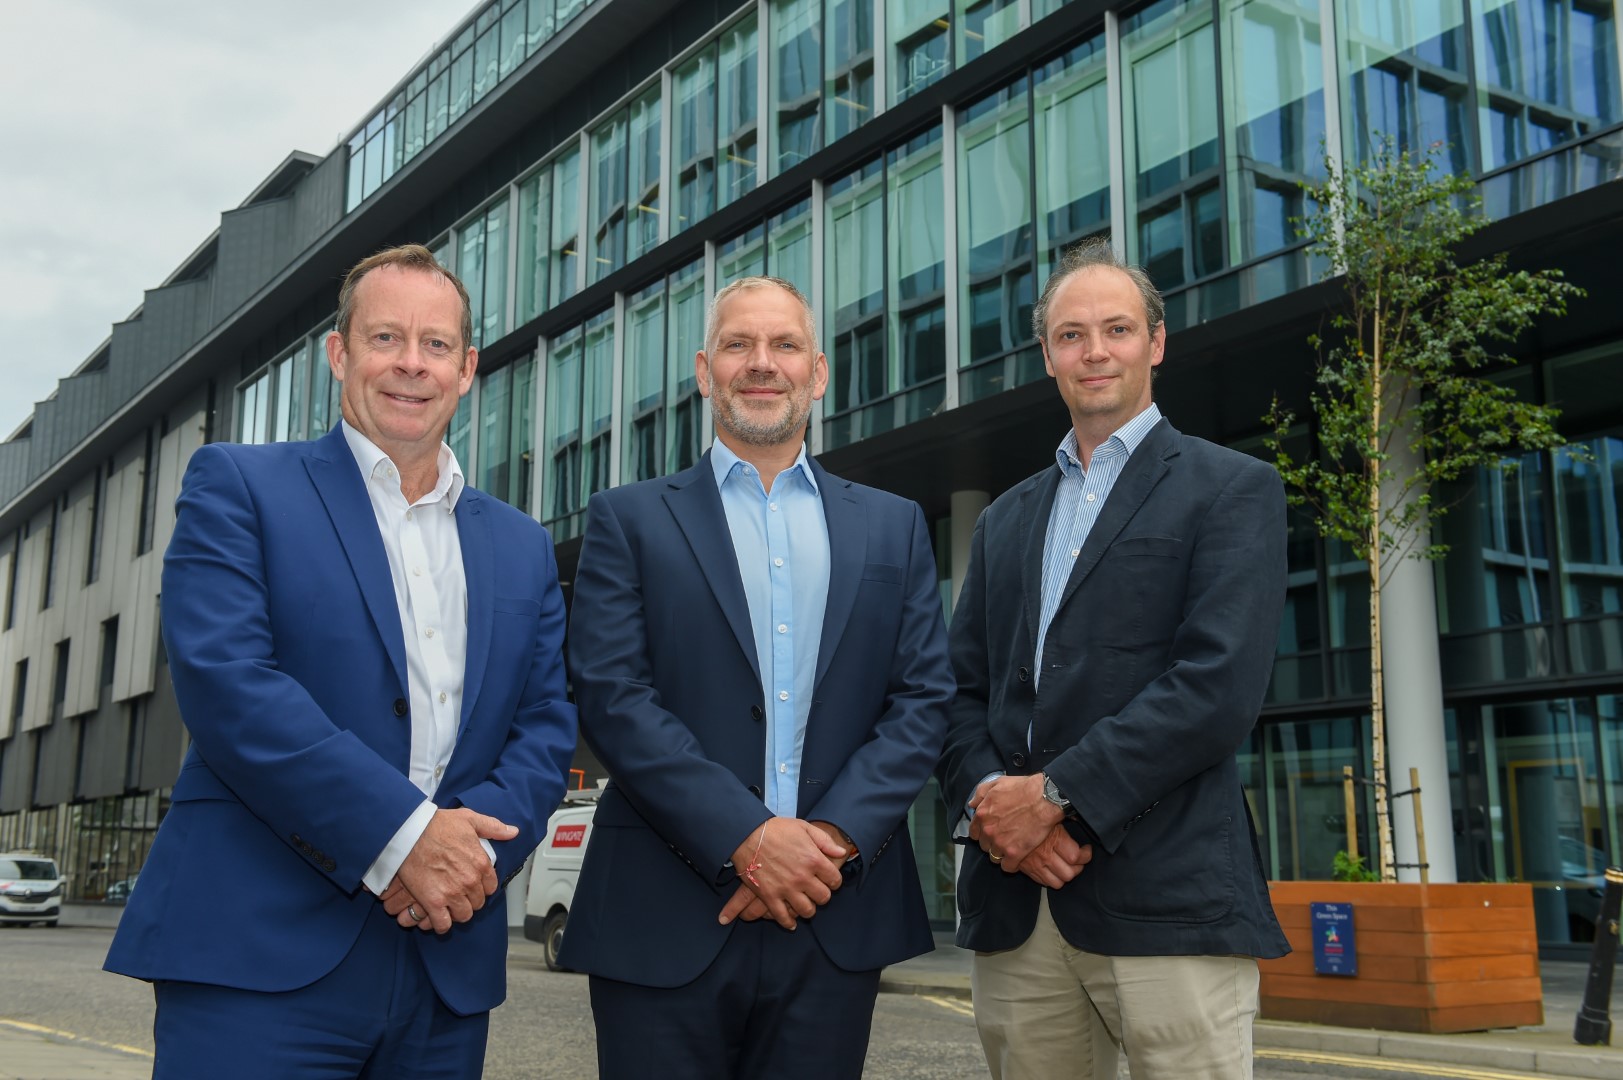 MEMBER NEWS: New Aberdeen offices positions COSL Drilling Europe for future growth